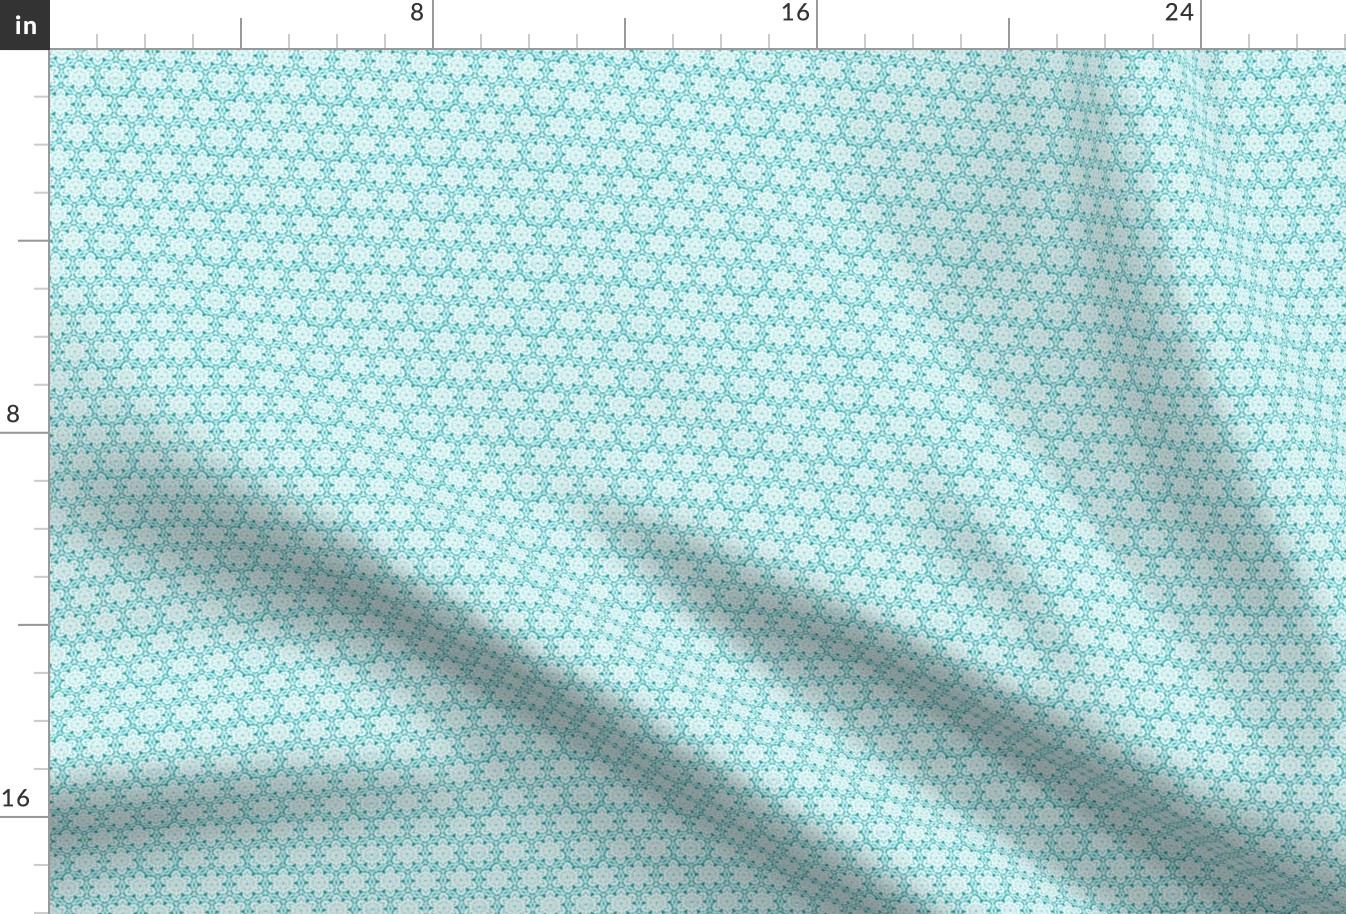 Snowflake_Lace_-teal1